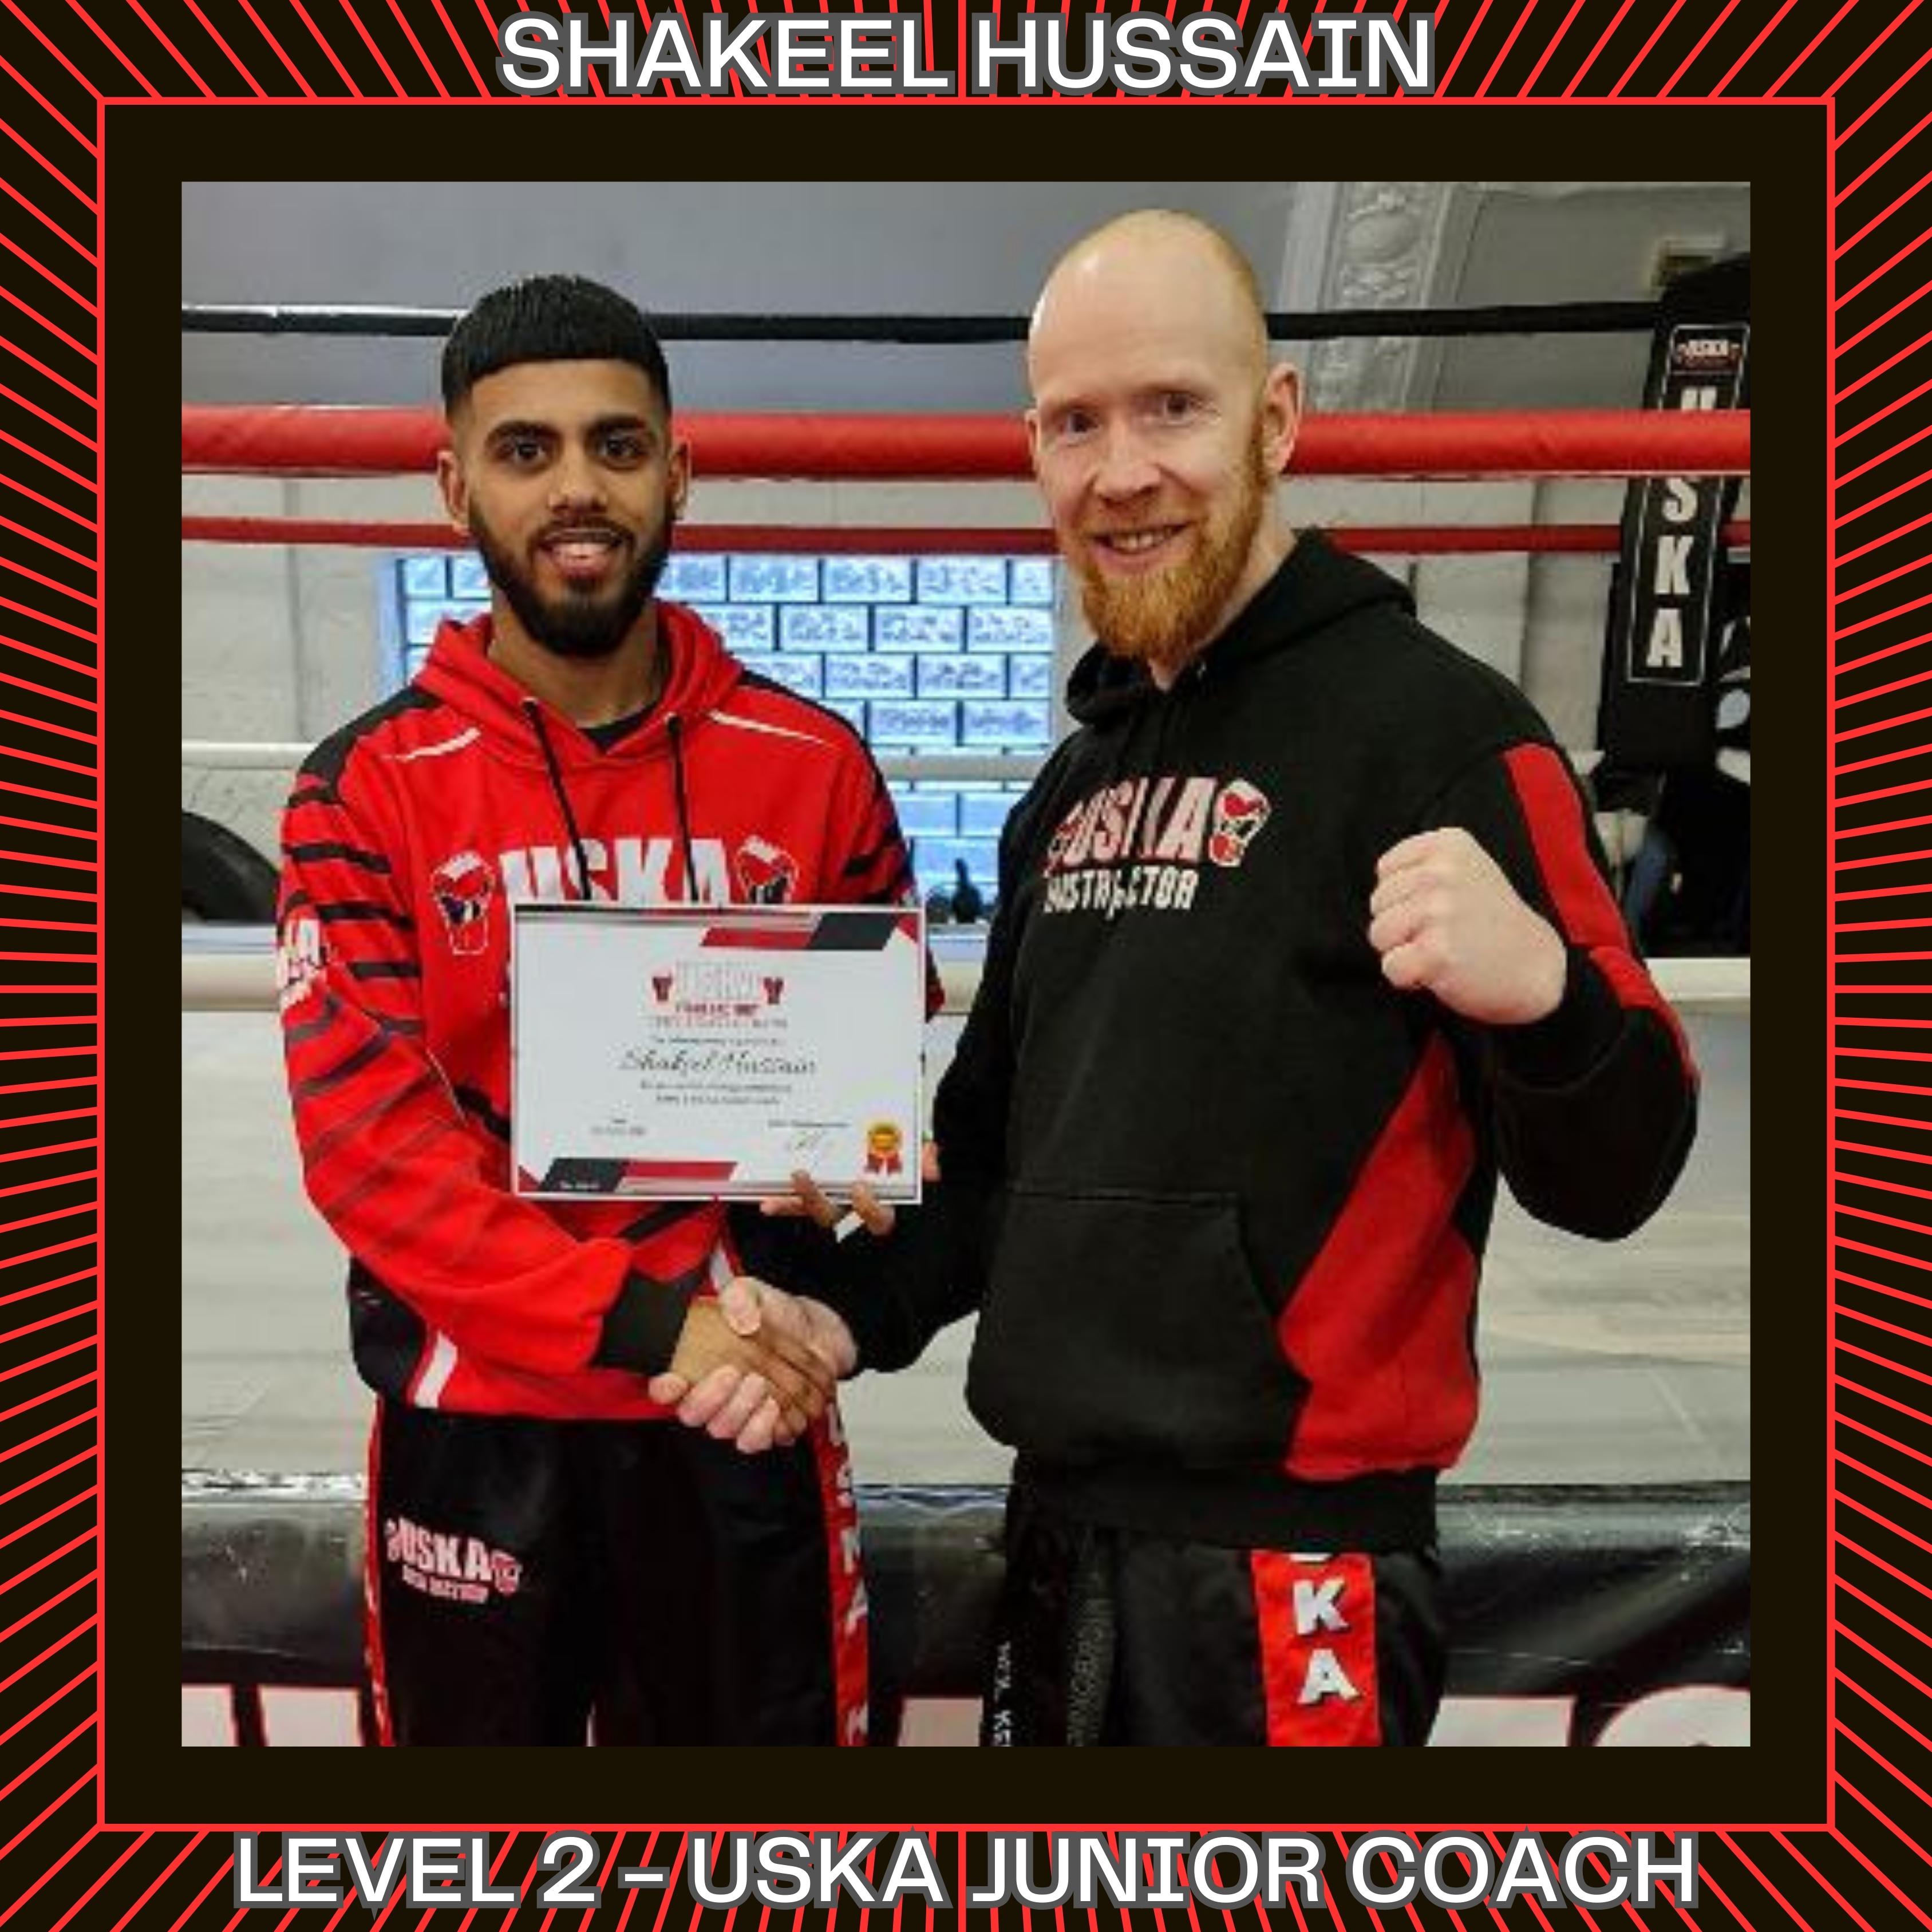 21-04-23 - Shakeel Hussain Awarded the first ever Level 2 Junior Coach Award